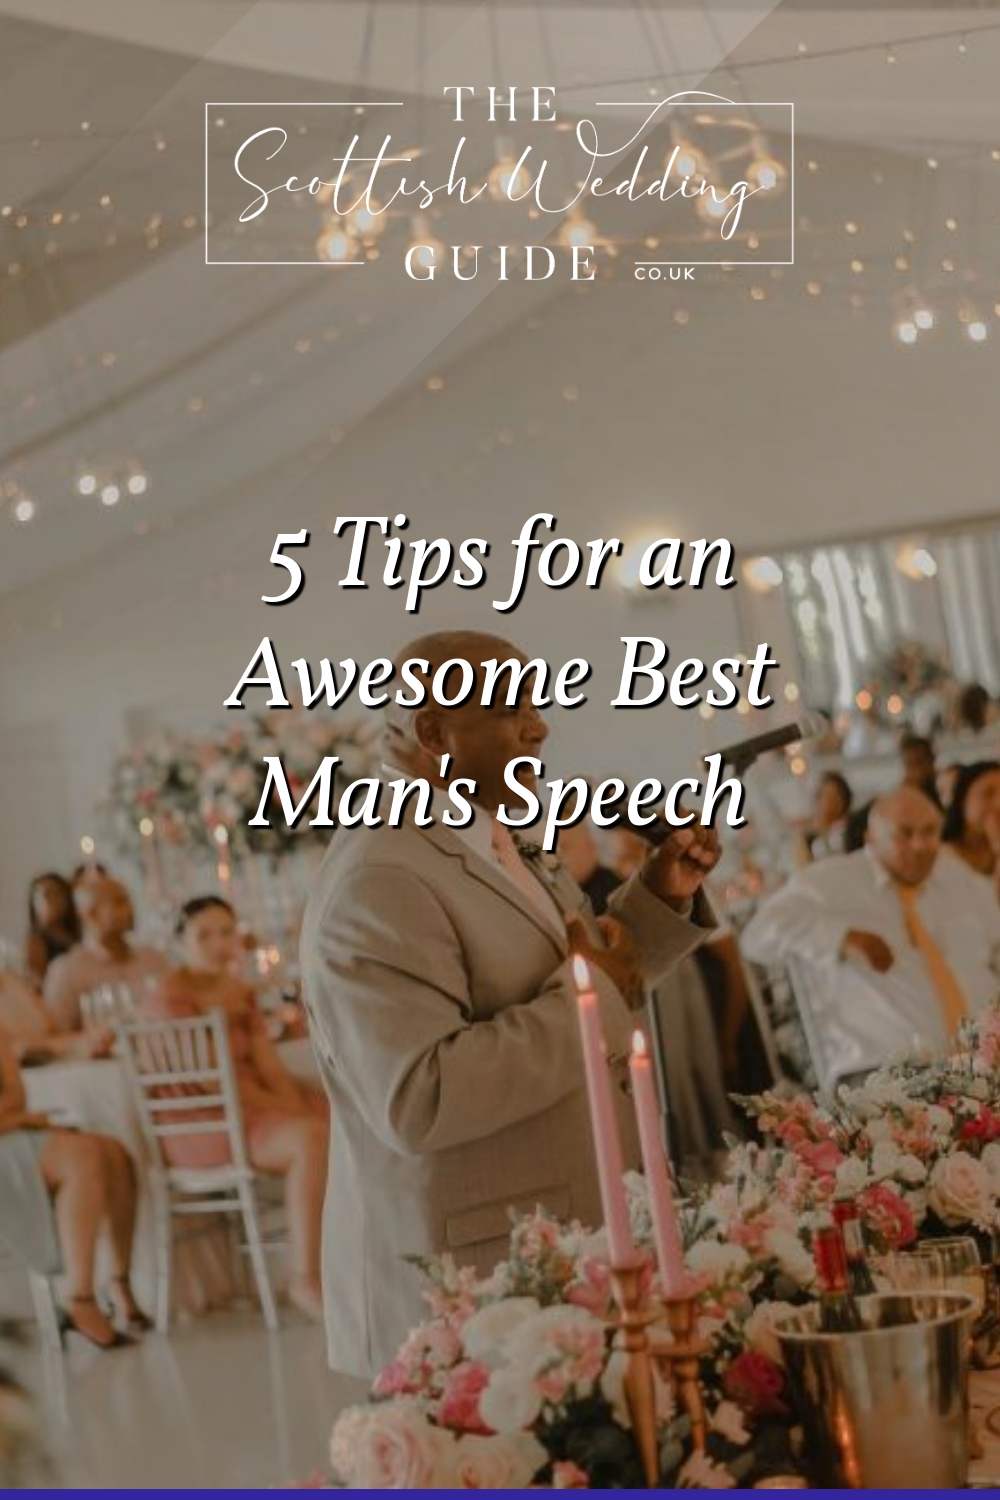 5 Tips for an Awesome Best Man’s Speech